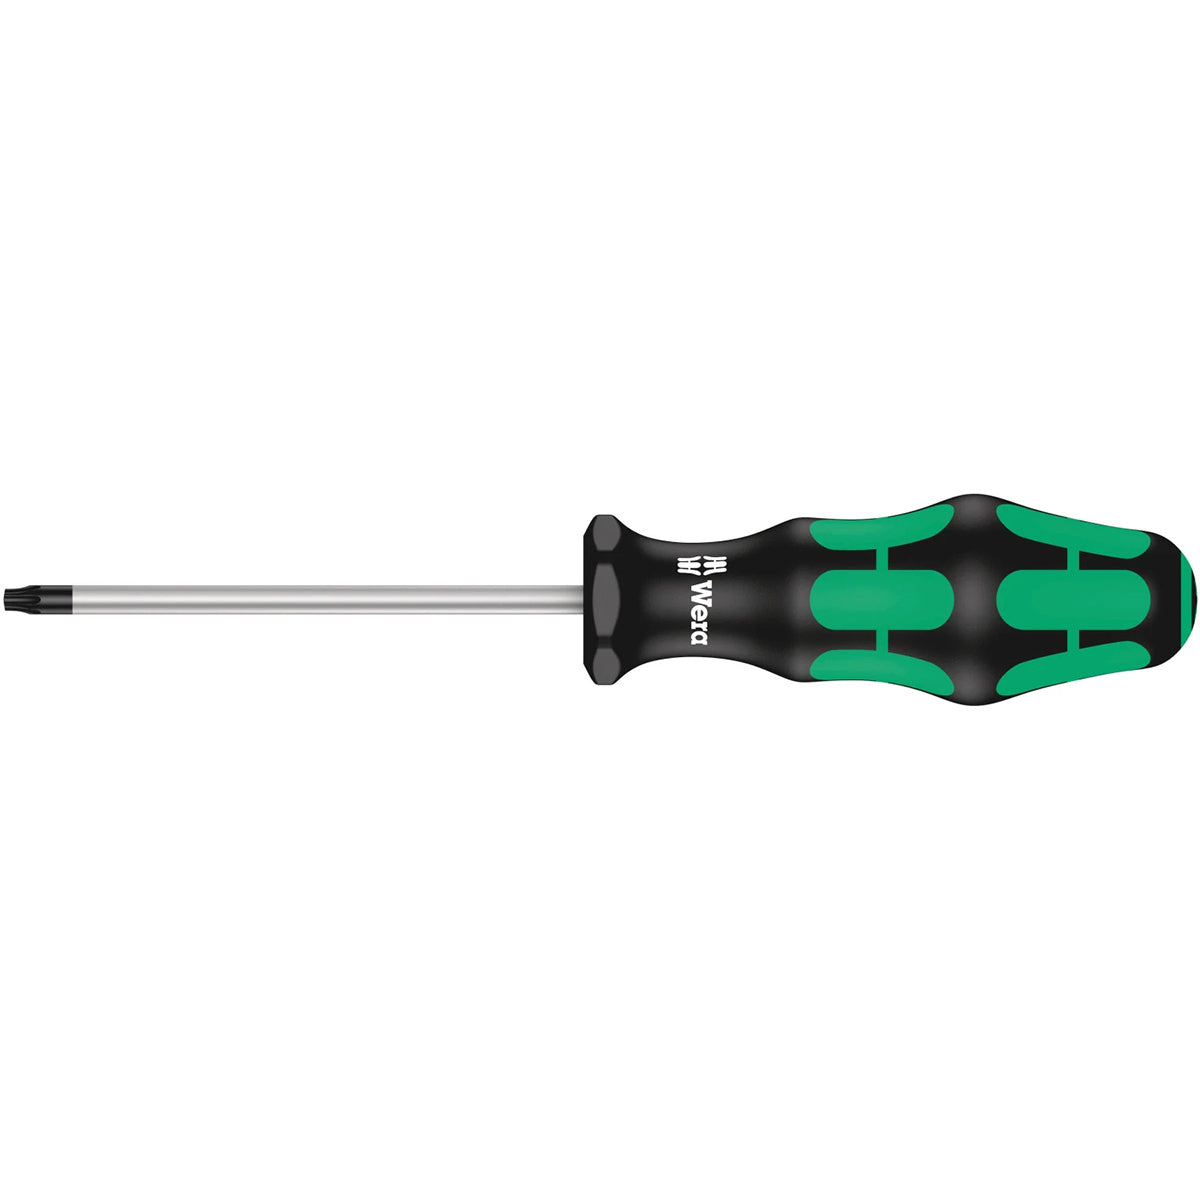 Wera 367 Torx HF Individual Torx Screwdriver With Holding Function - T25